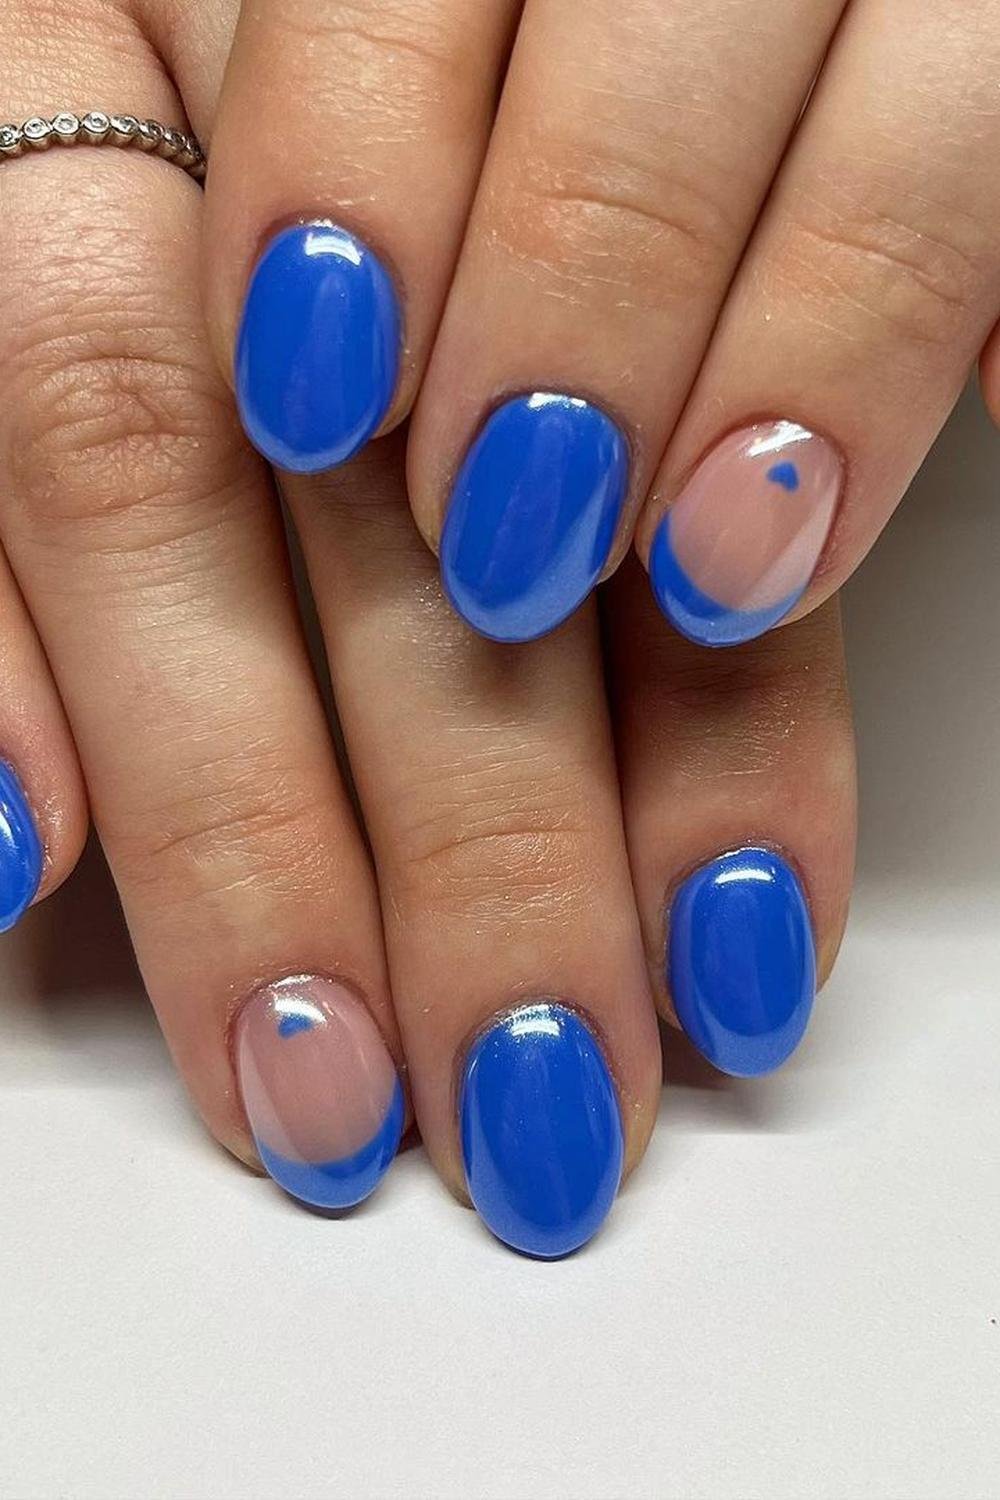 15 - Picture of Blue Chrome Nails